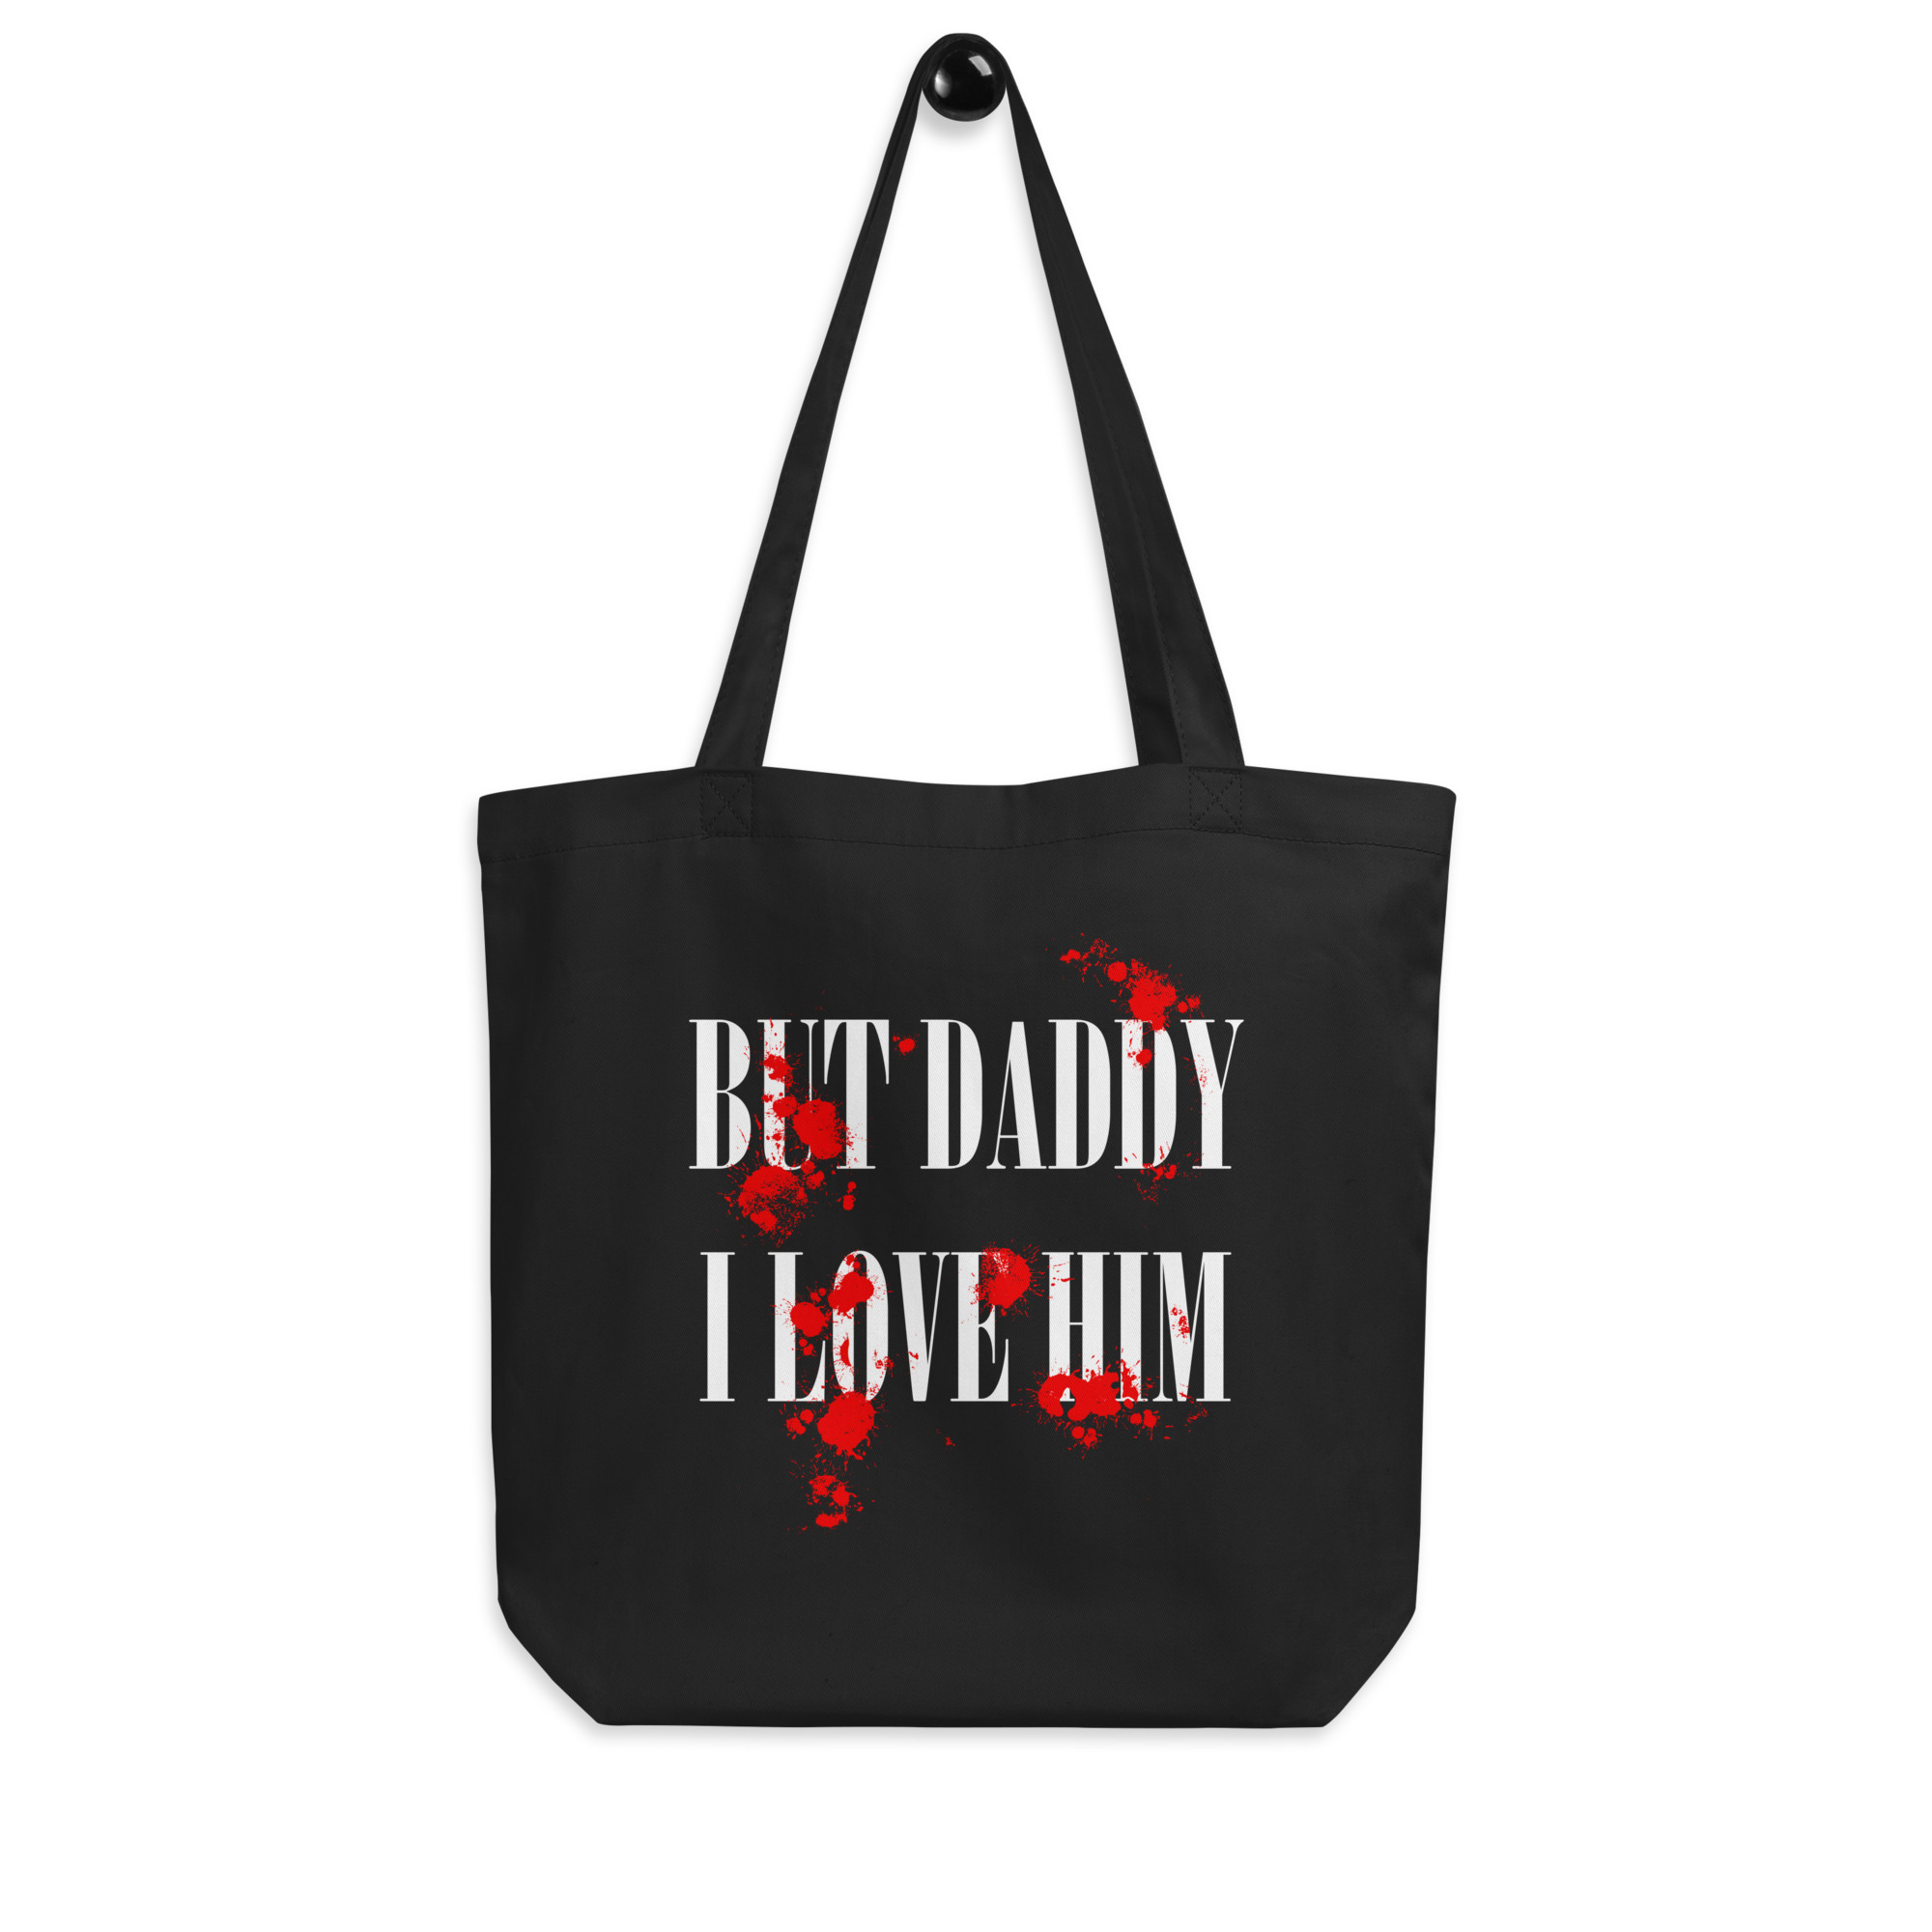 Featured image for “But daddy I love him - Eco Tote Bag”